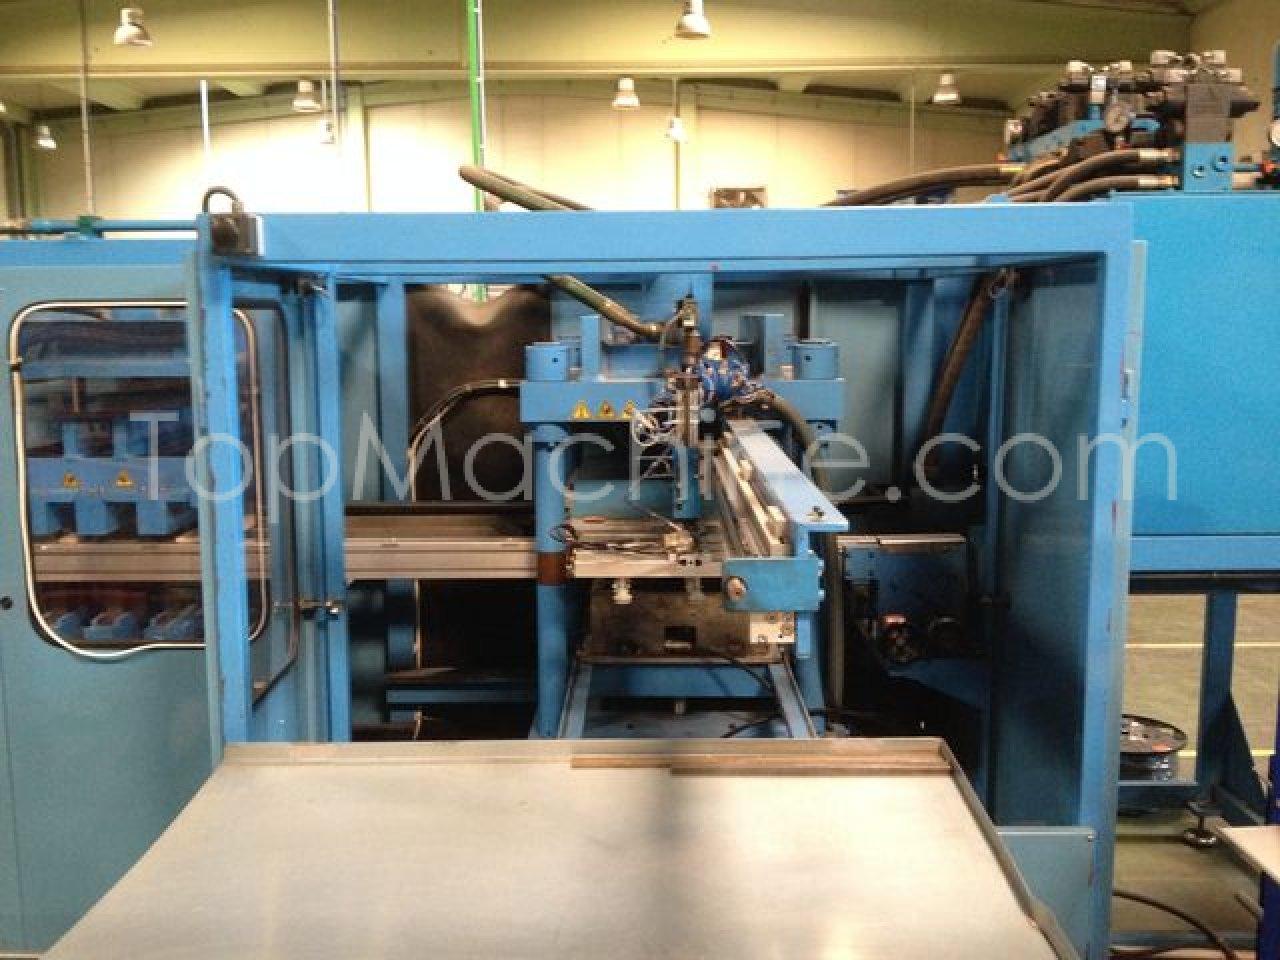 Used EVASA Mat Ns Af Thermoformage & feuilles Emballage